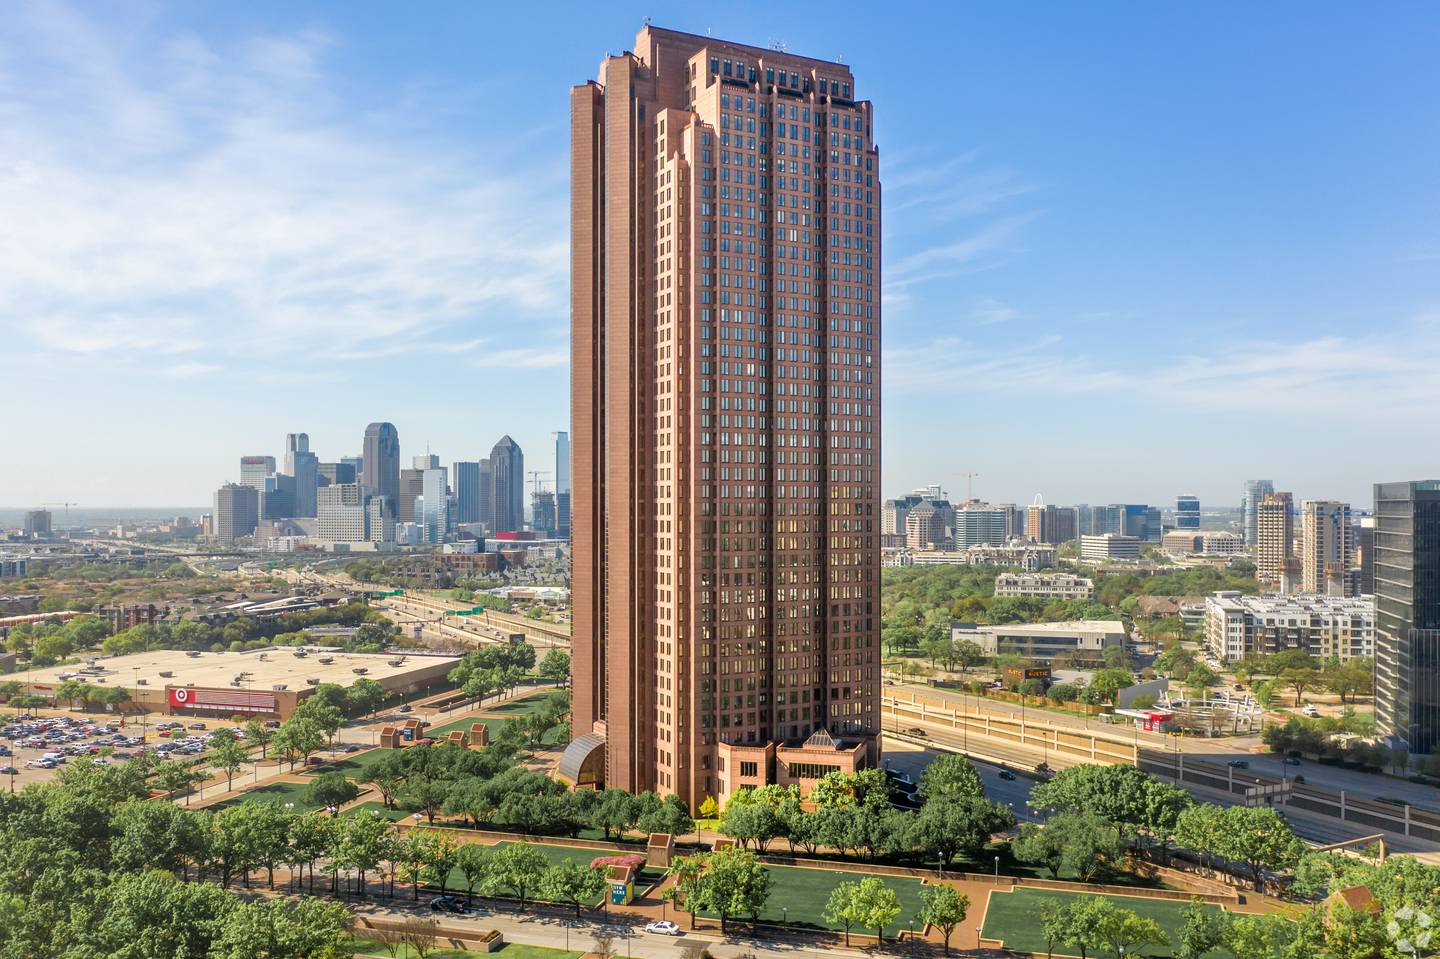 Neiman Marcus' new "corporate hub" will be located in the 42-storey Cityplace Tower, centralised between its Neiman Marcus Downtown and NorthPark flagships in Dallas, Texas.